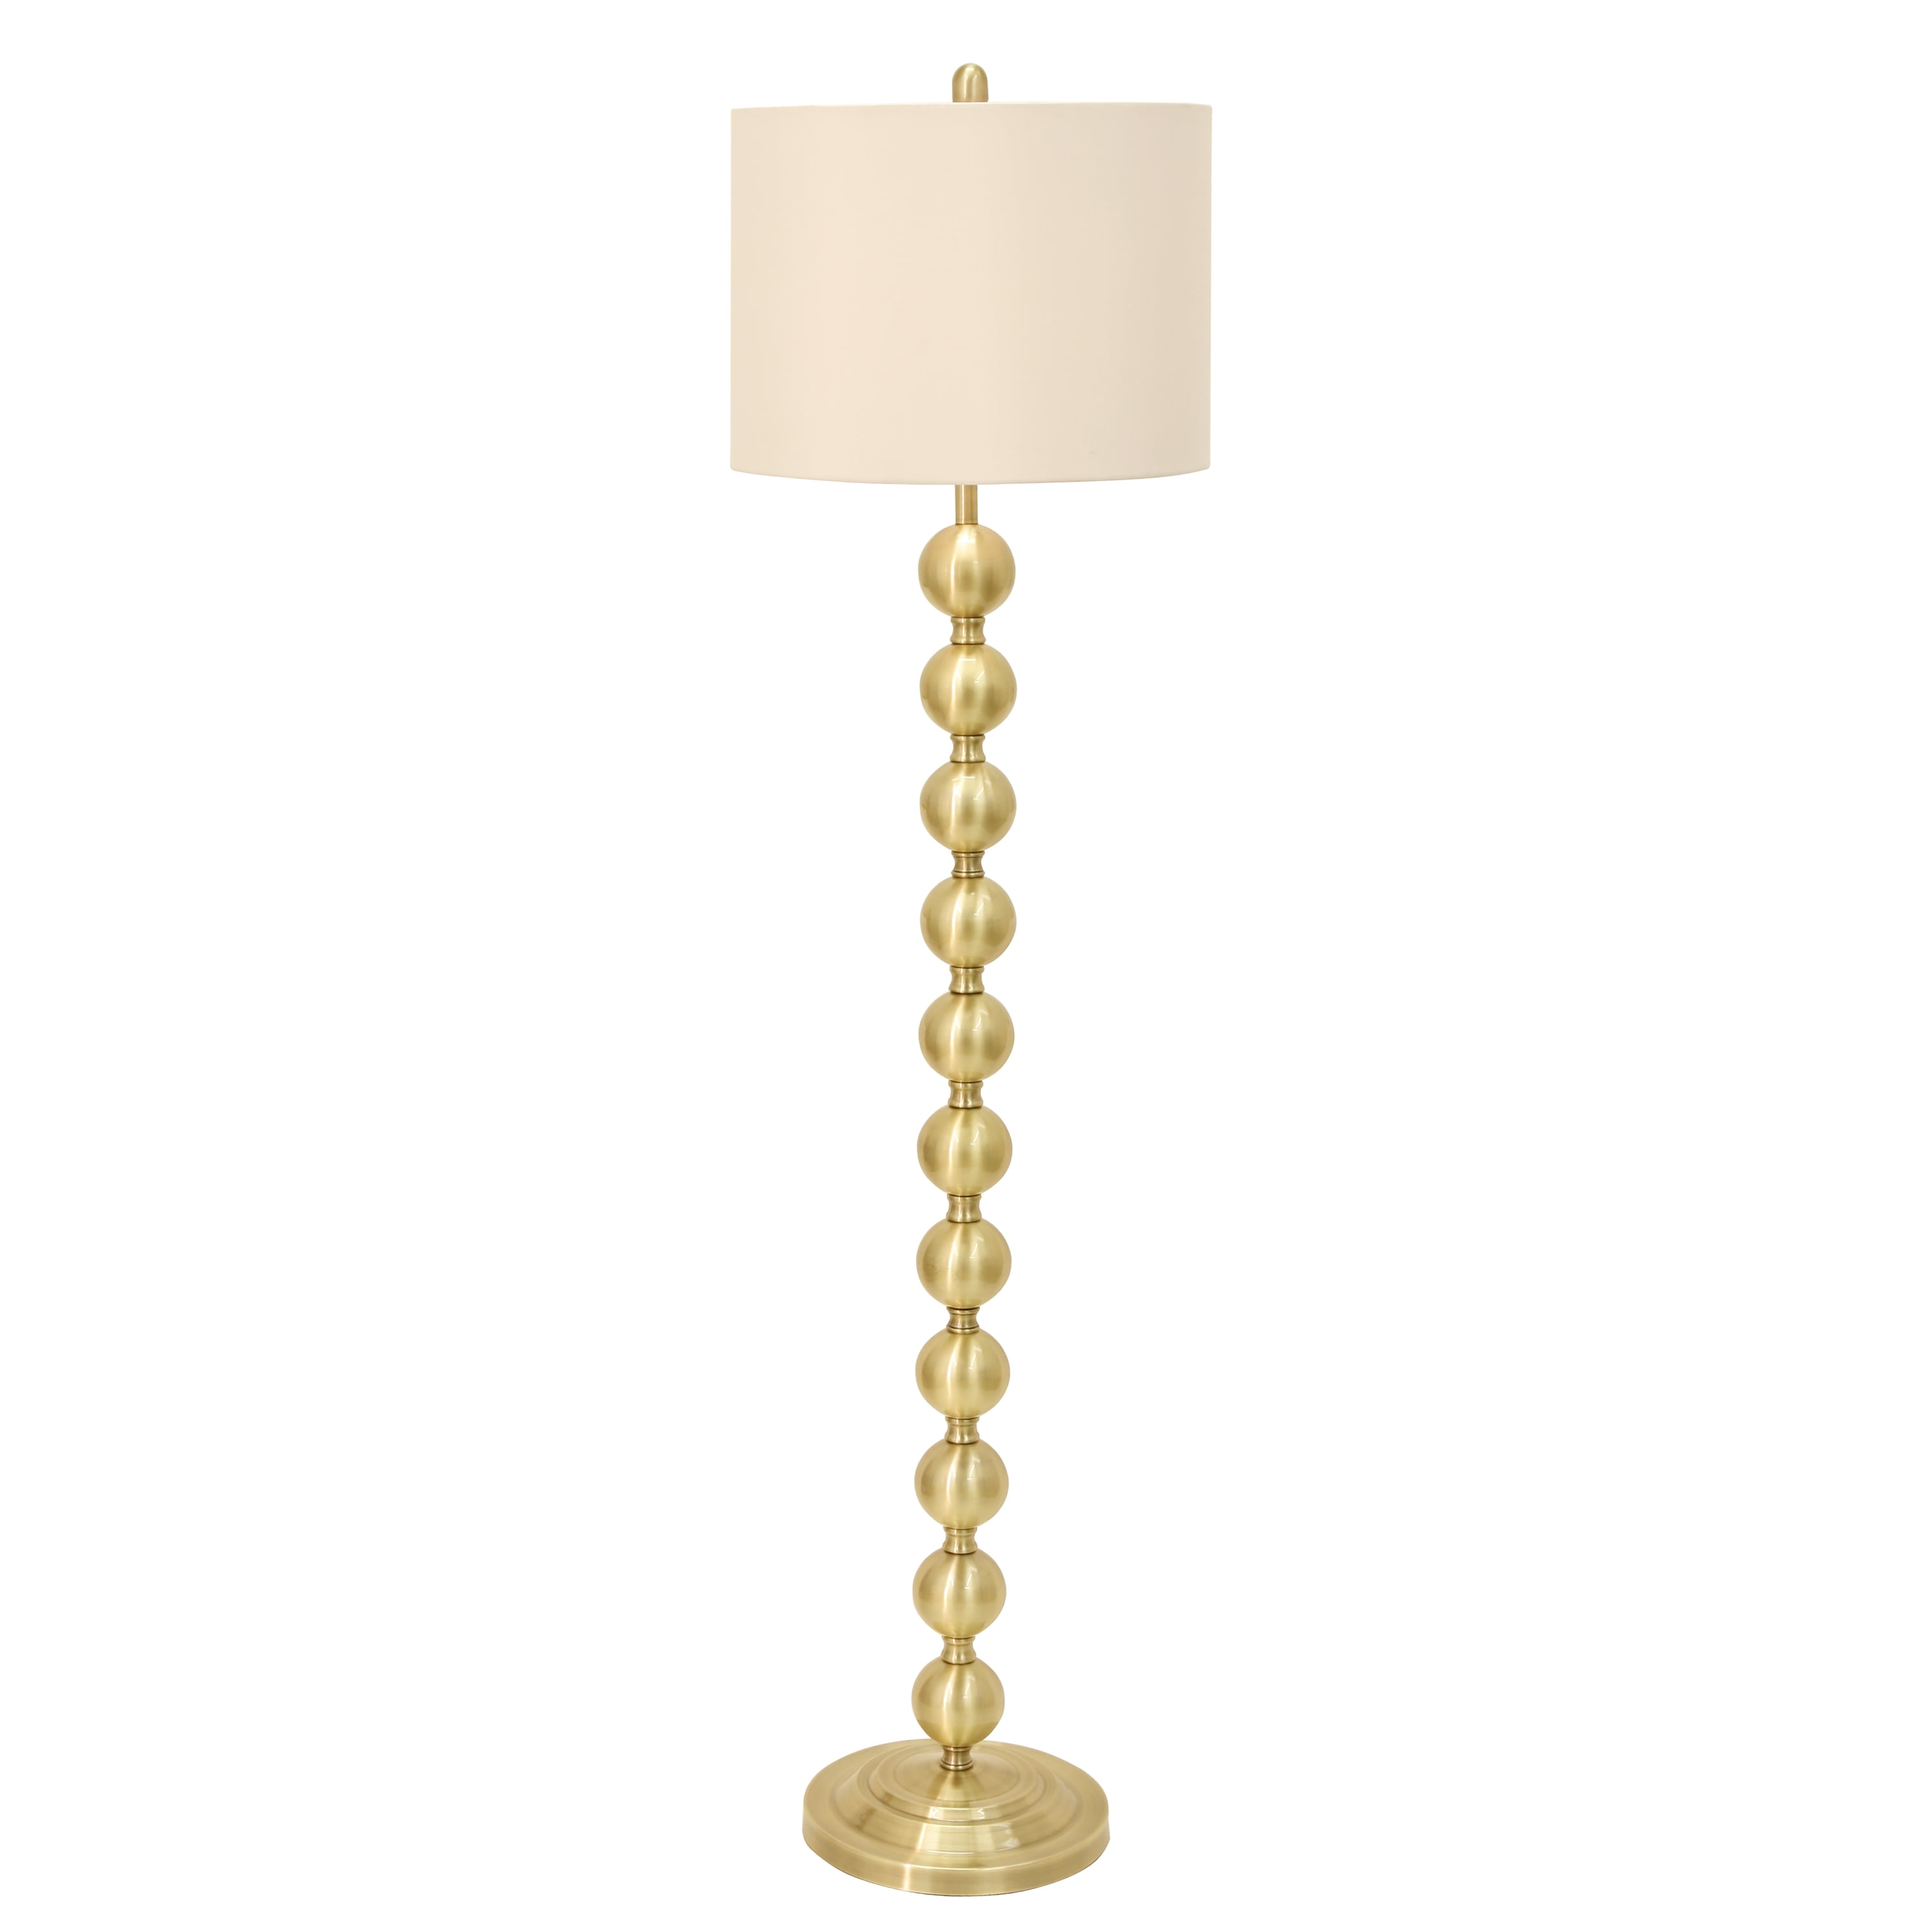 59 Stacked Ball Floor Lamp Made Of, Round Ball Floor Lamps